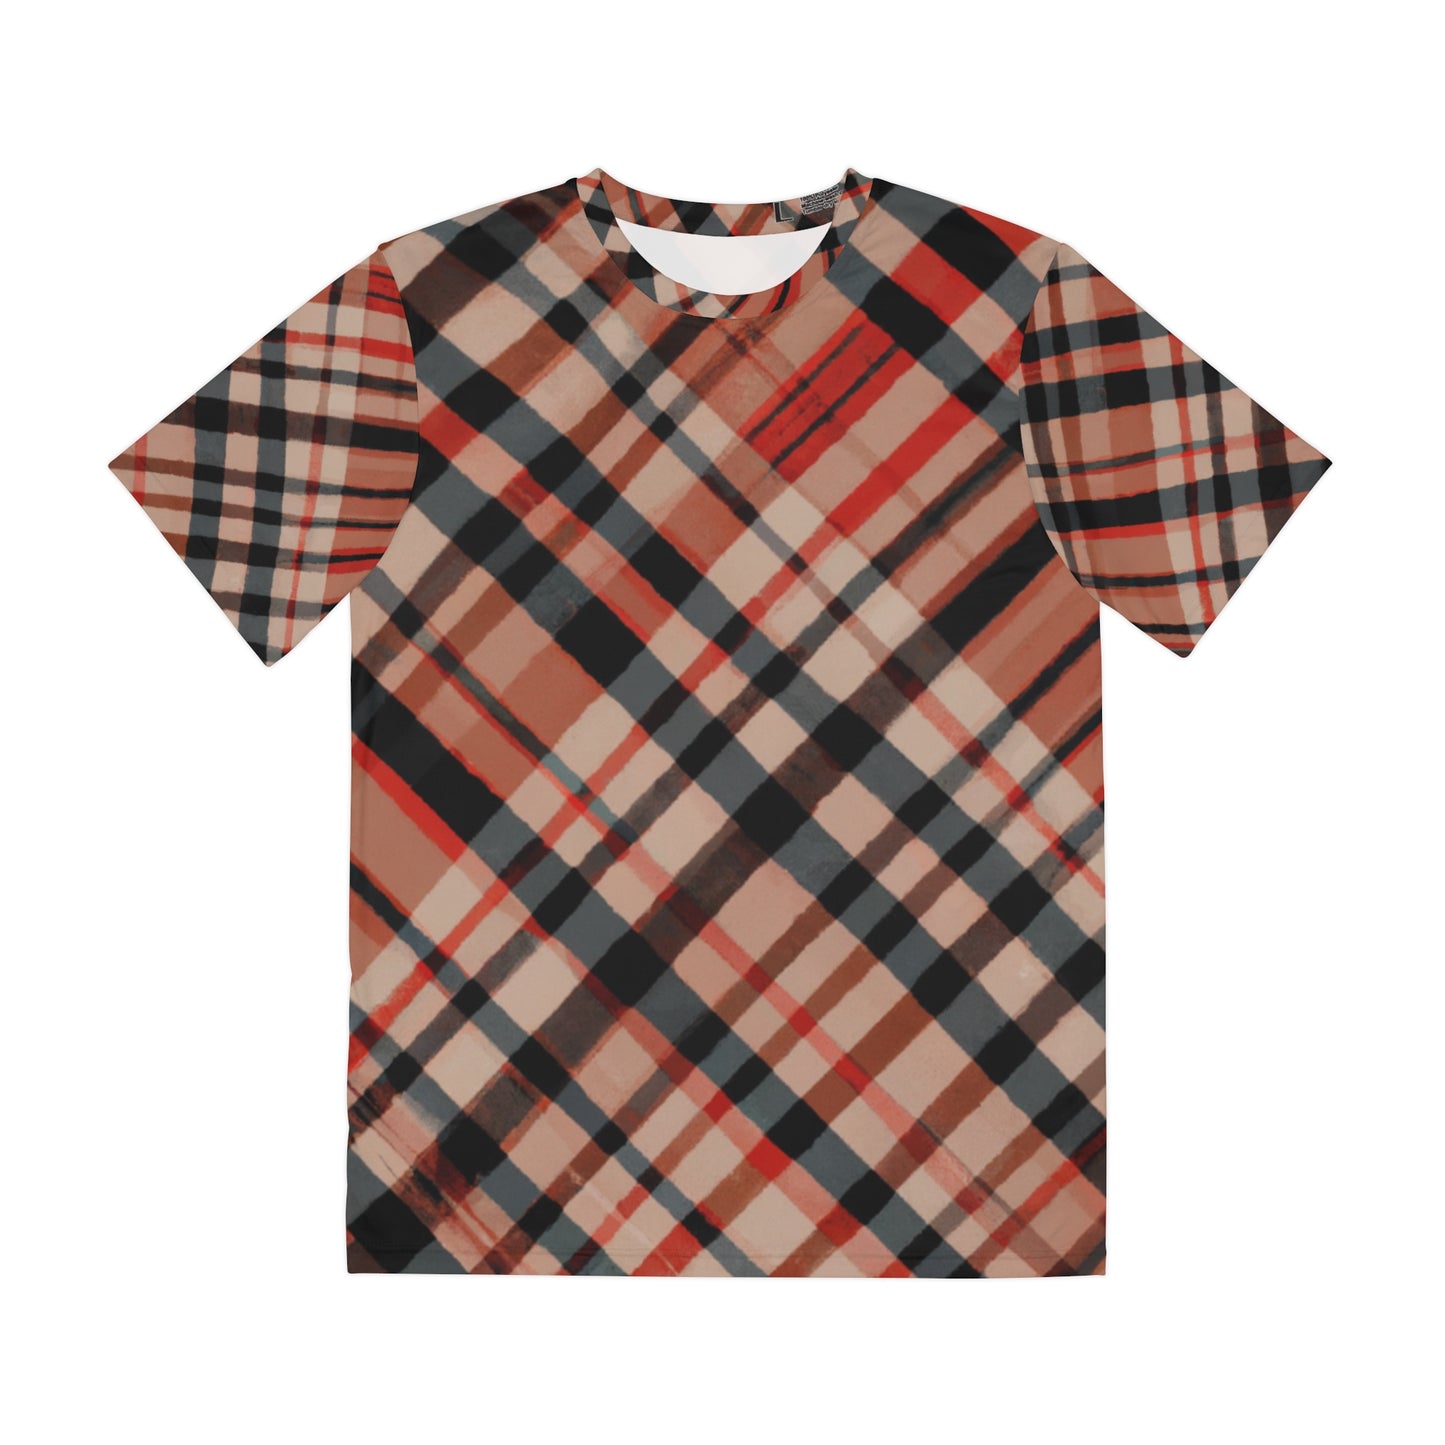 Front view Highland Ember Clash Crewneck Pullover All-Over Print Short-Sleeved Shirt red black beige brown plaid pattern 